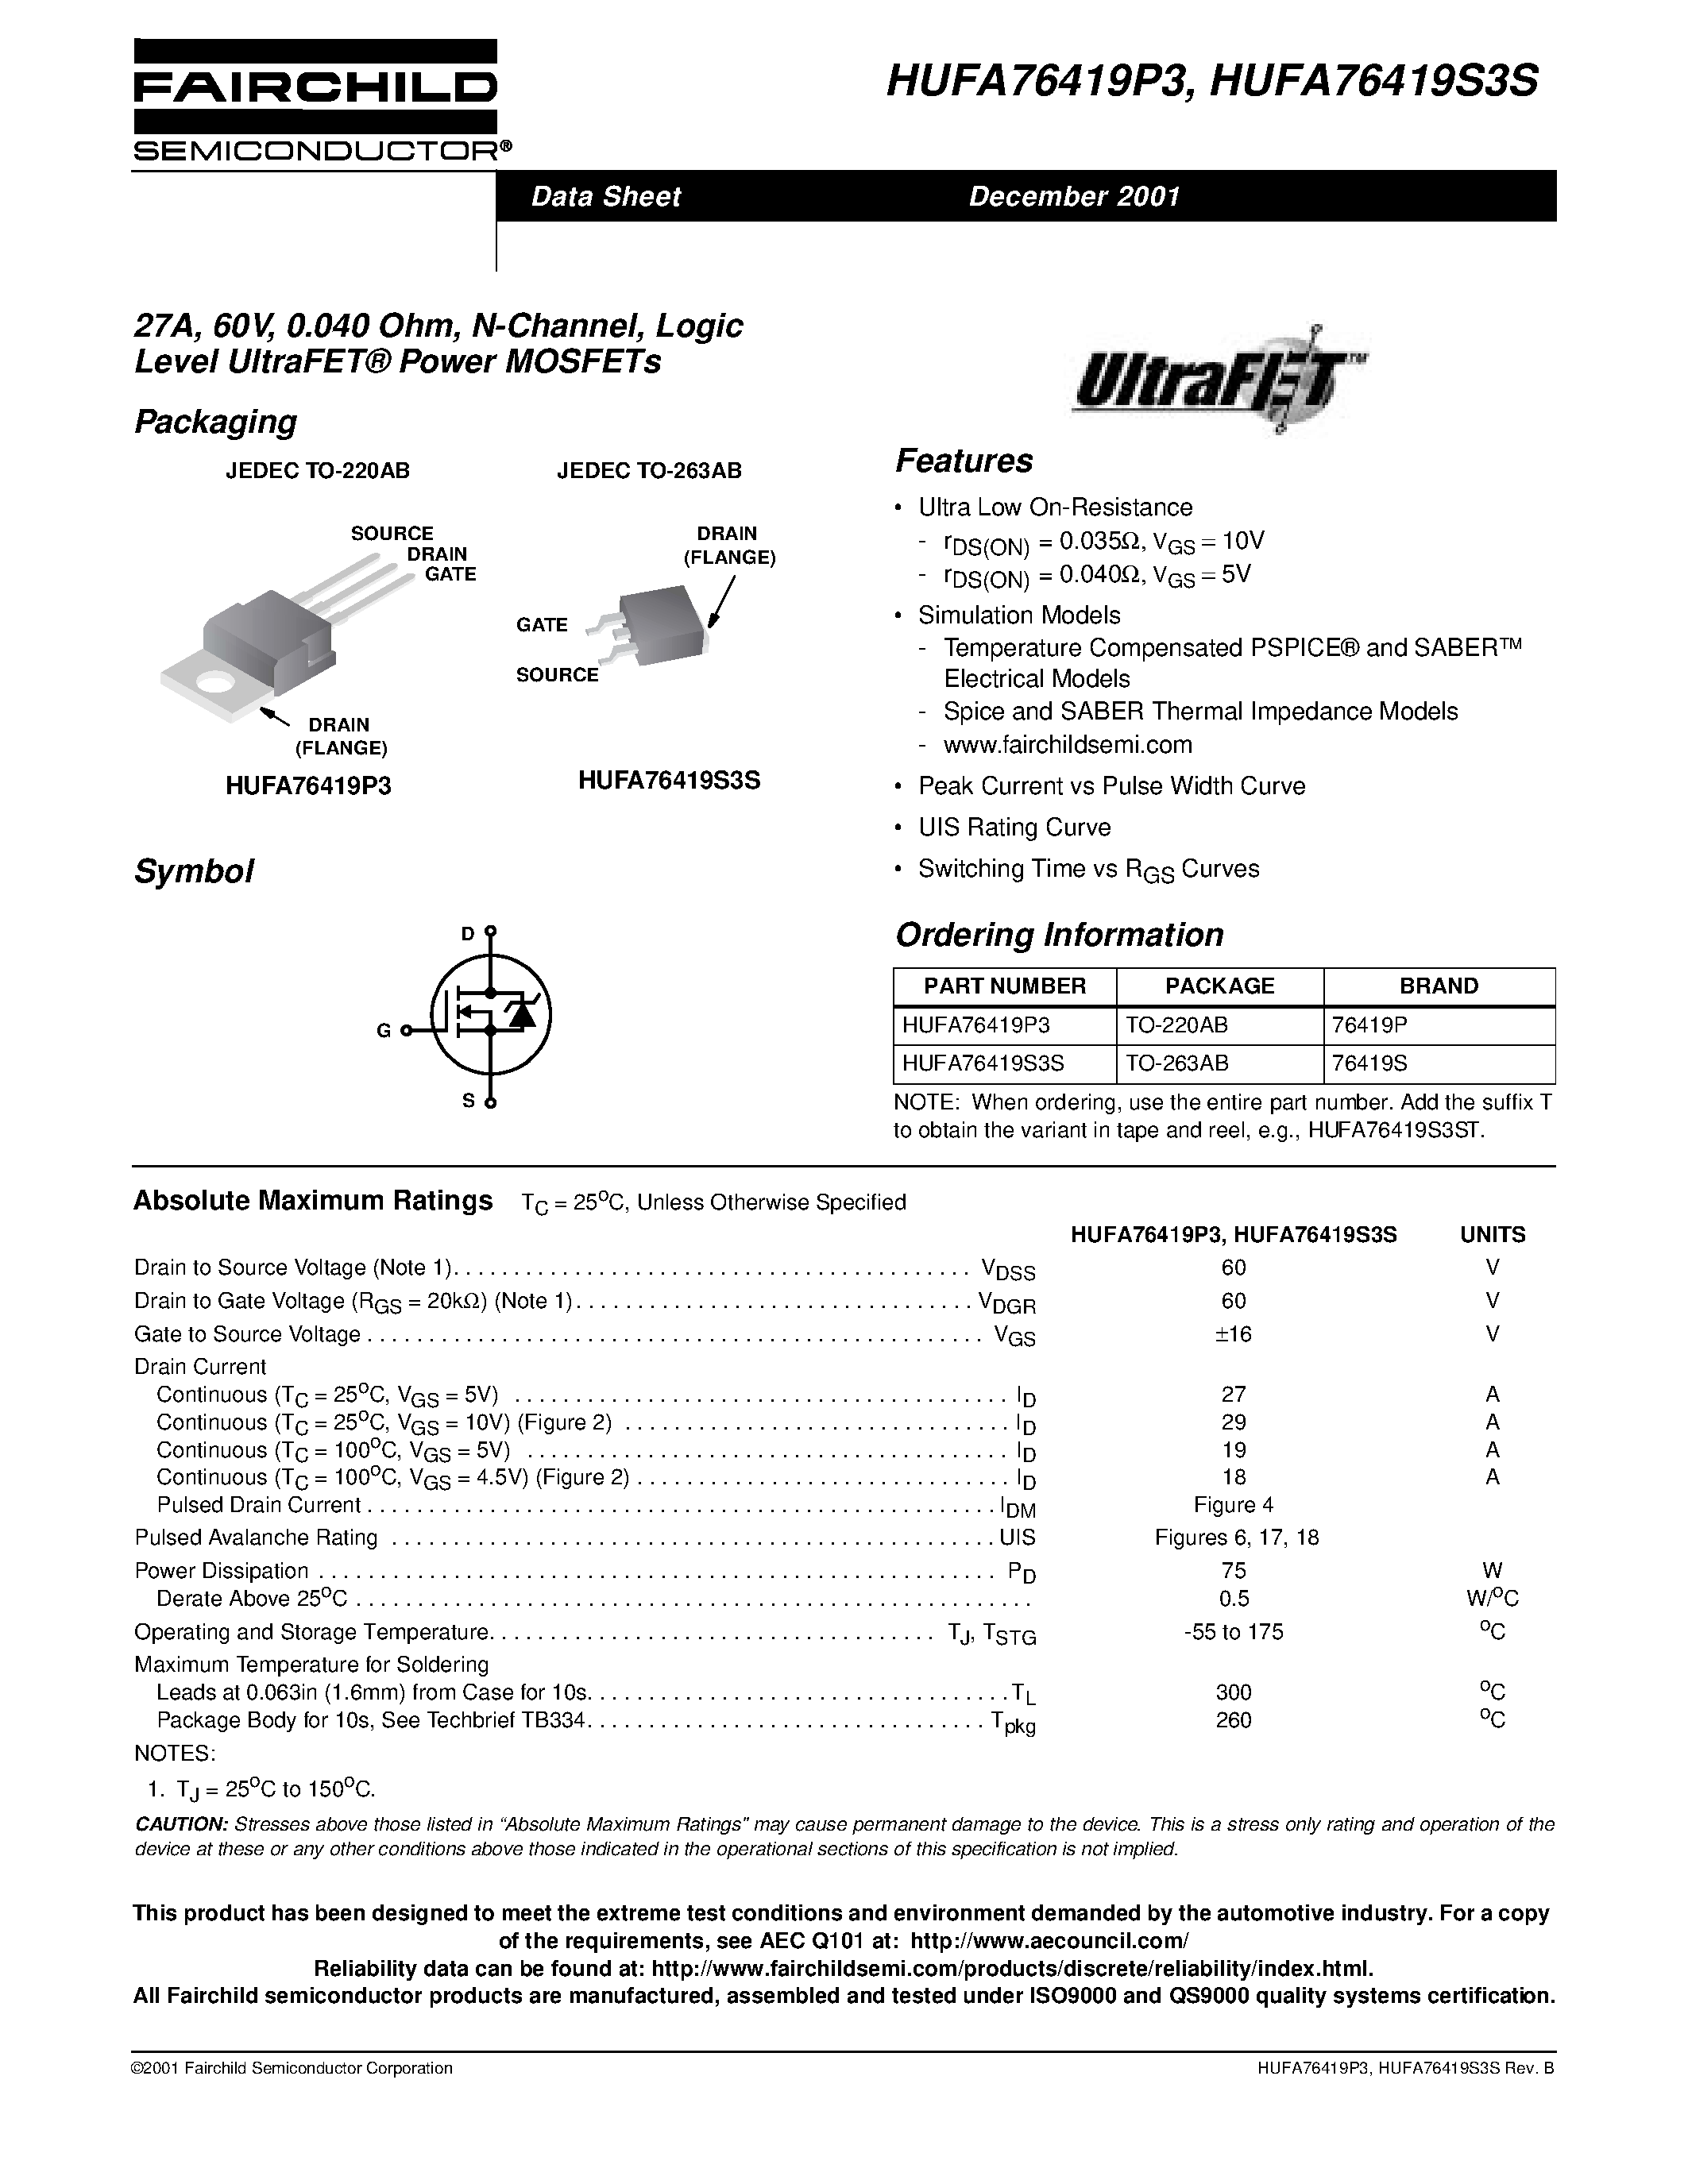 Datasheet HUFA76419P3 - 27A/ 60V/ 0.040 Ohm/ N-Channel/ Logic Level UltraFET Power MOSFETs page 1